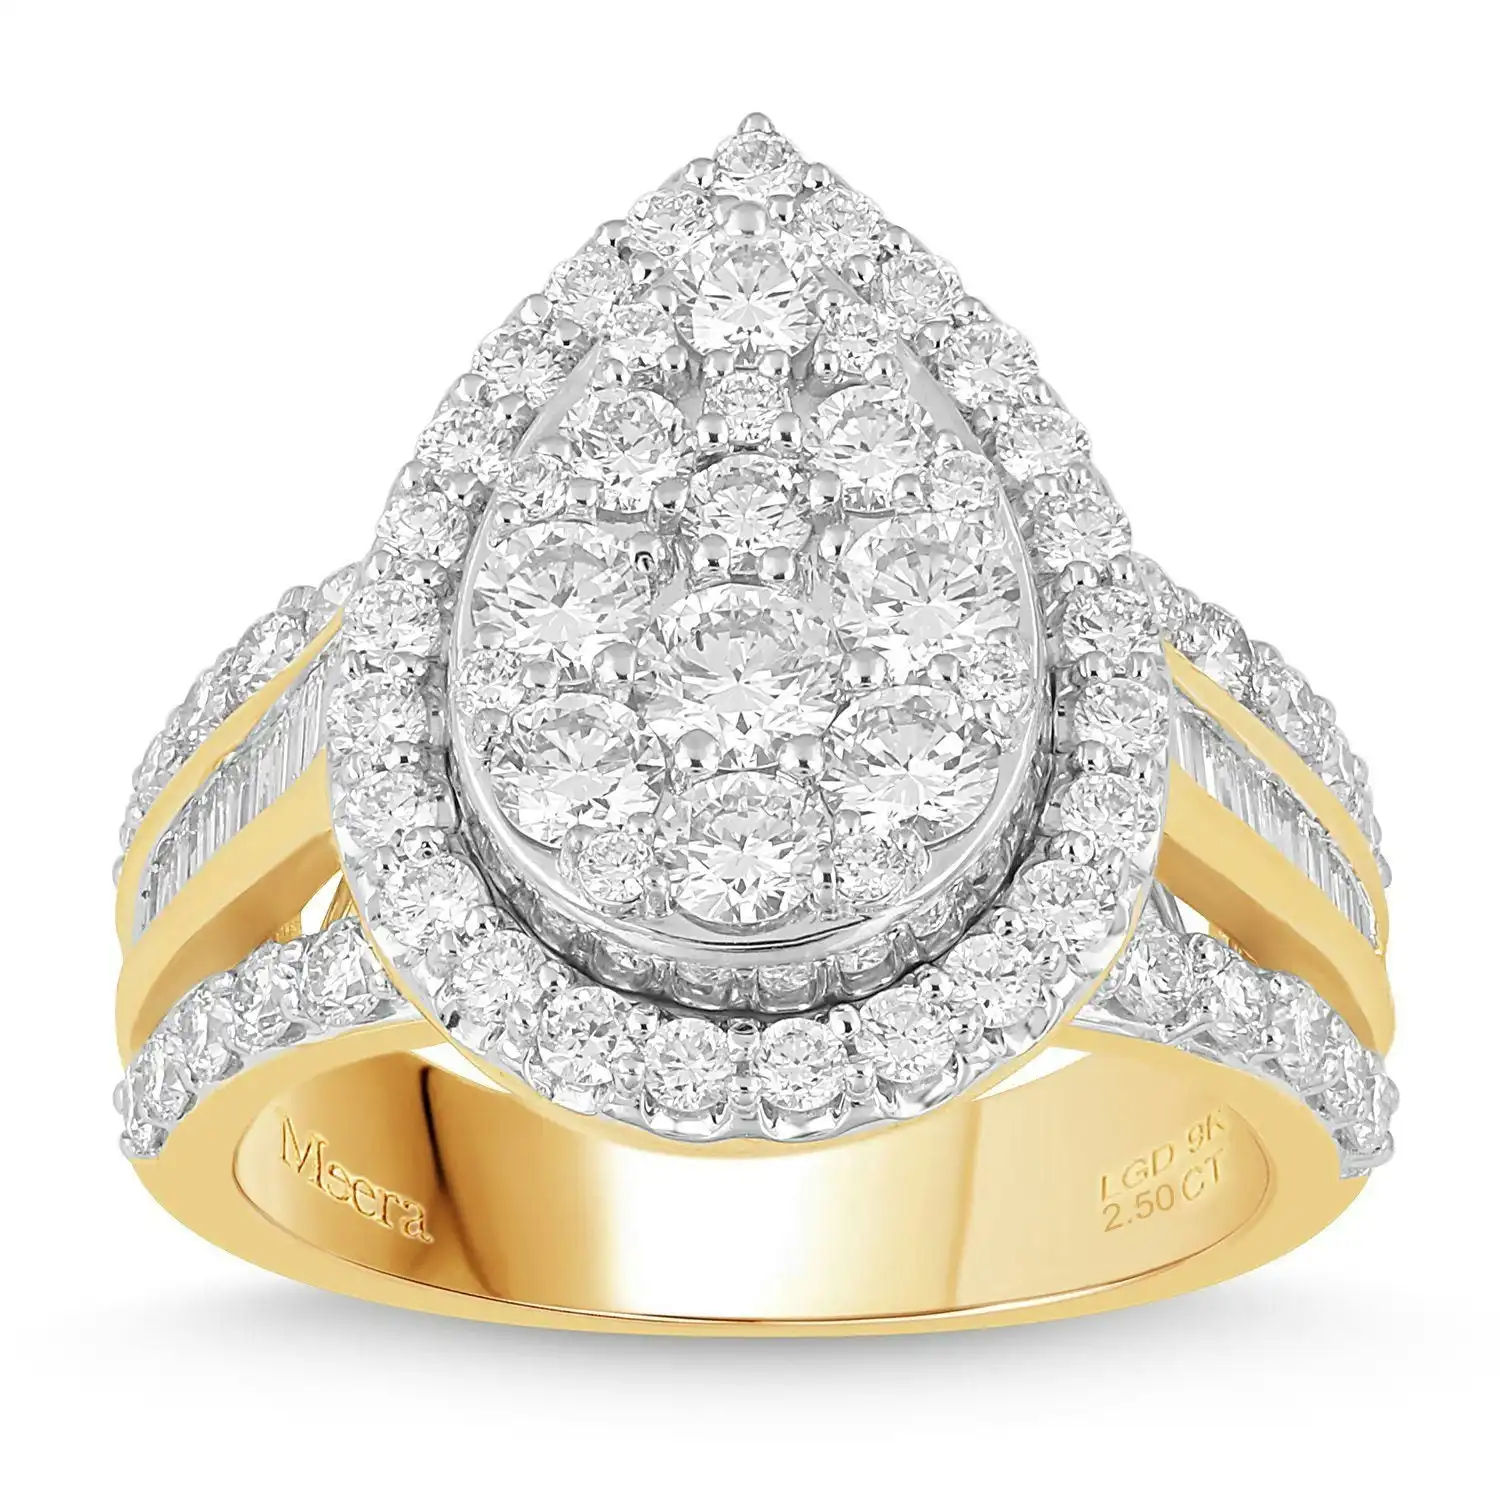 Meera Pear Halo Ring with 2.50ct of Laboratory Grown Diamonds in 9ct Yellow Gold